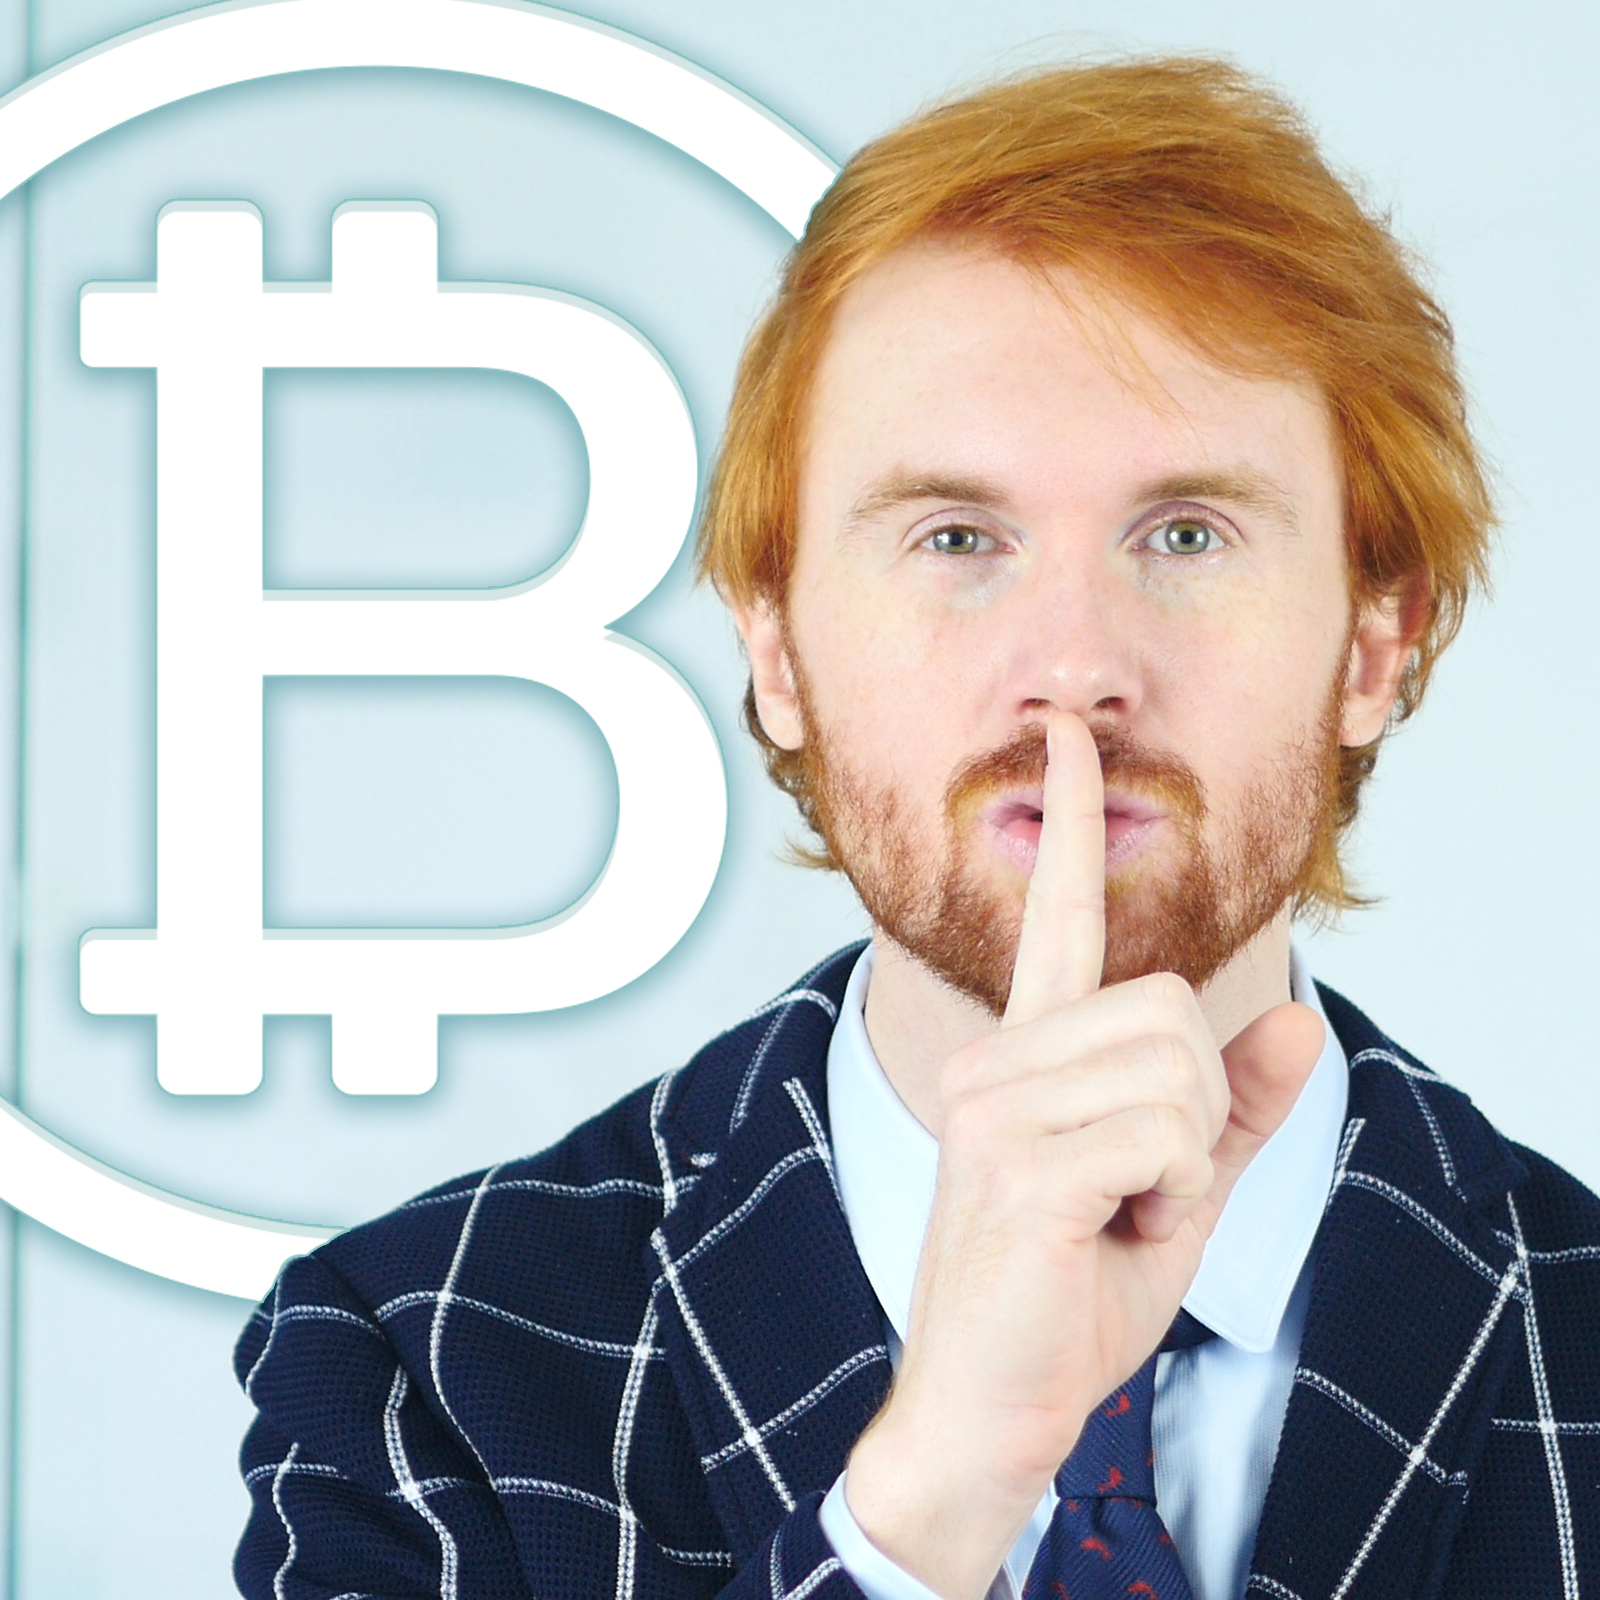 Stay Safe By Keeping Your 'Bitcoin Business' to Yourself